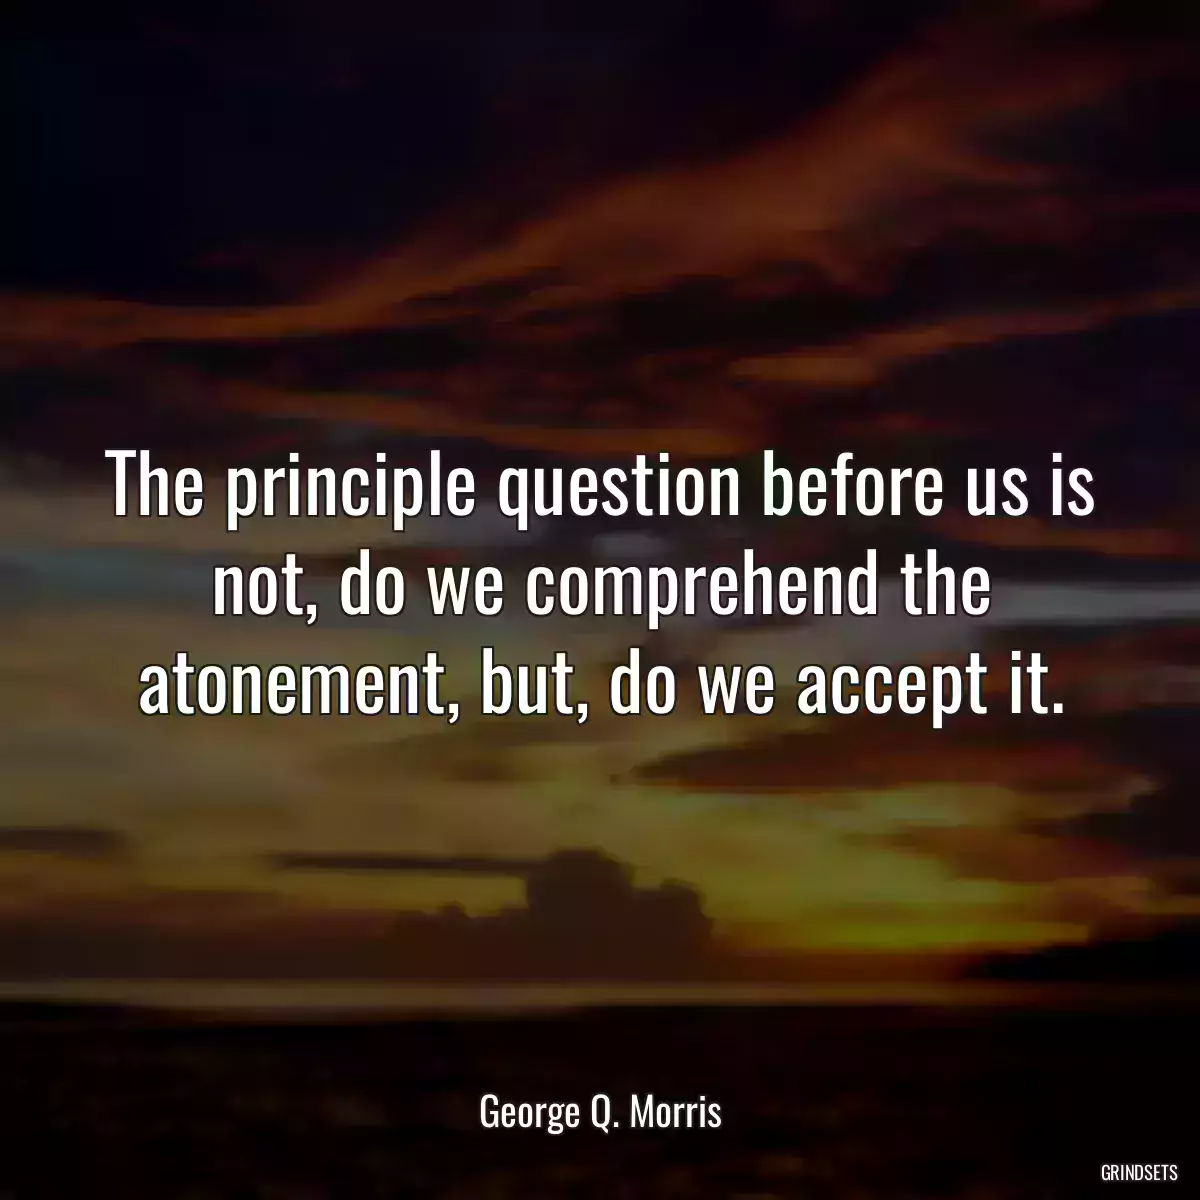 The principle question before us is not, do we comprehend the atonement, but, do we accept it.